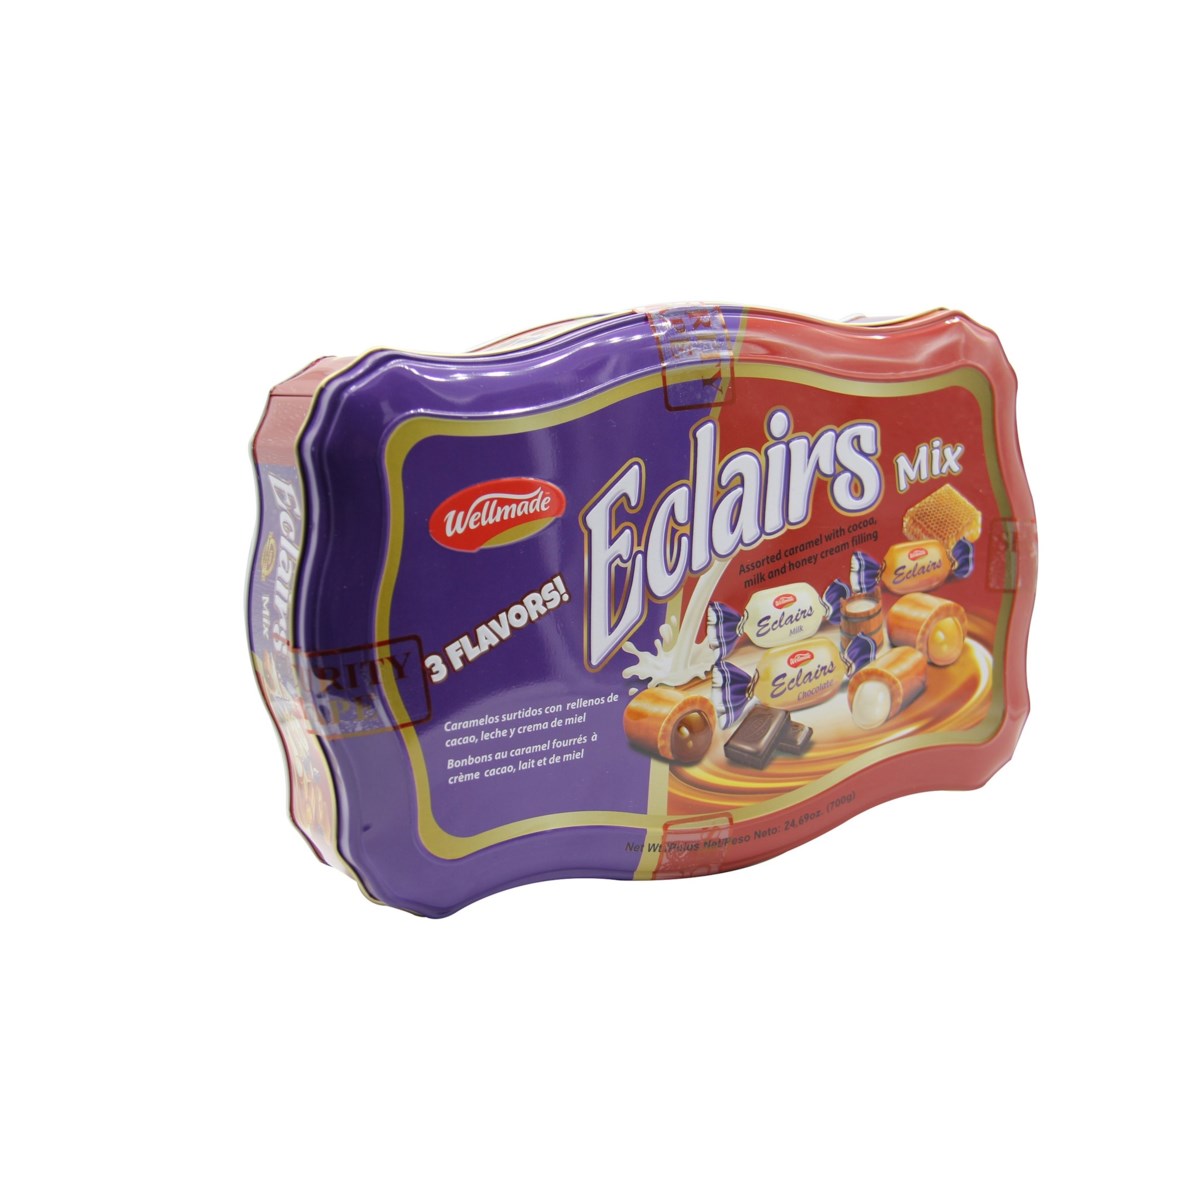 Wellmade Eclairs 3 Assorted flavors tin 700g * 8